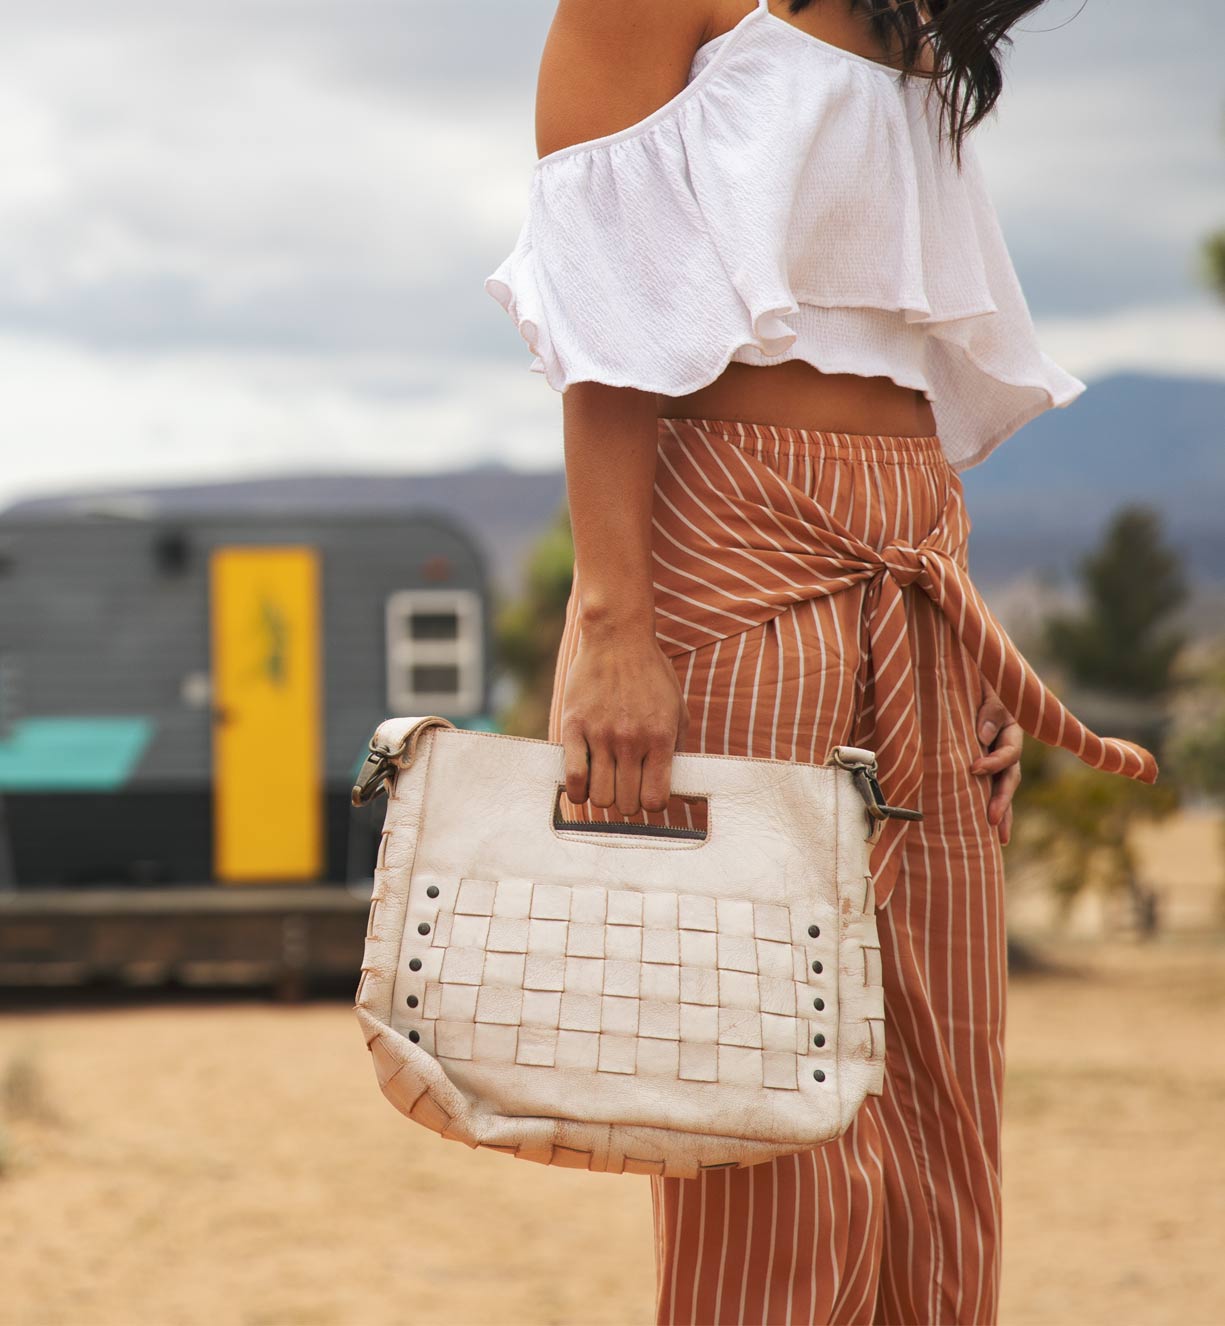 A woman in a white top and striped pants holding a distressed white Bed Stu Orchid bag.